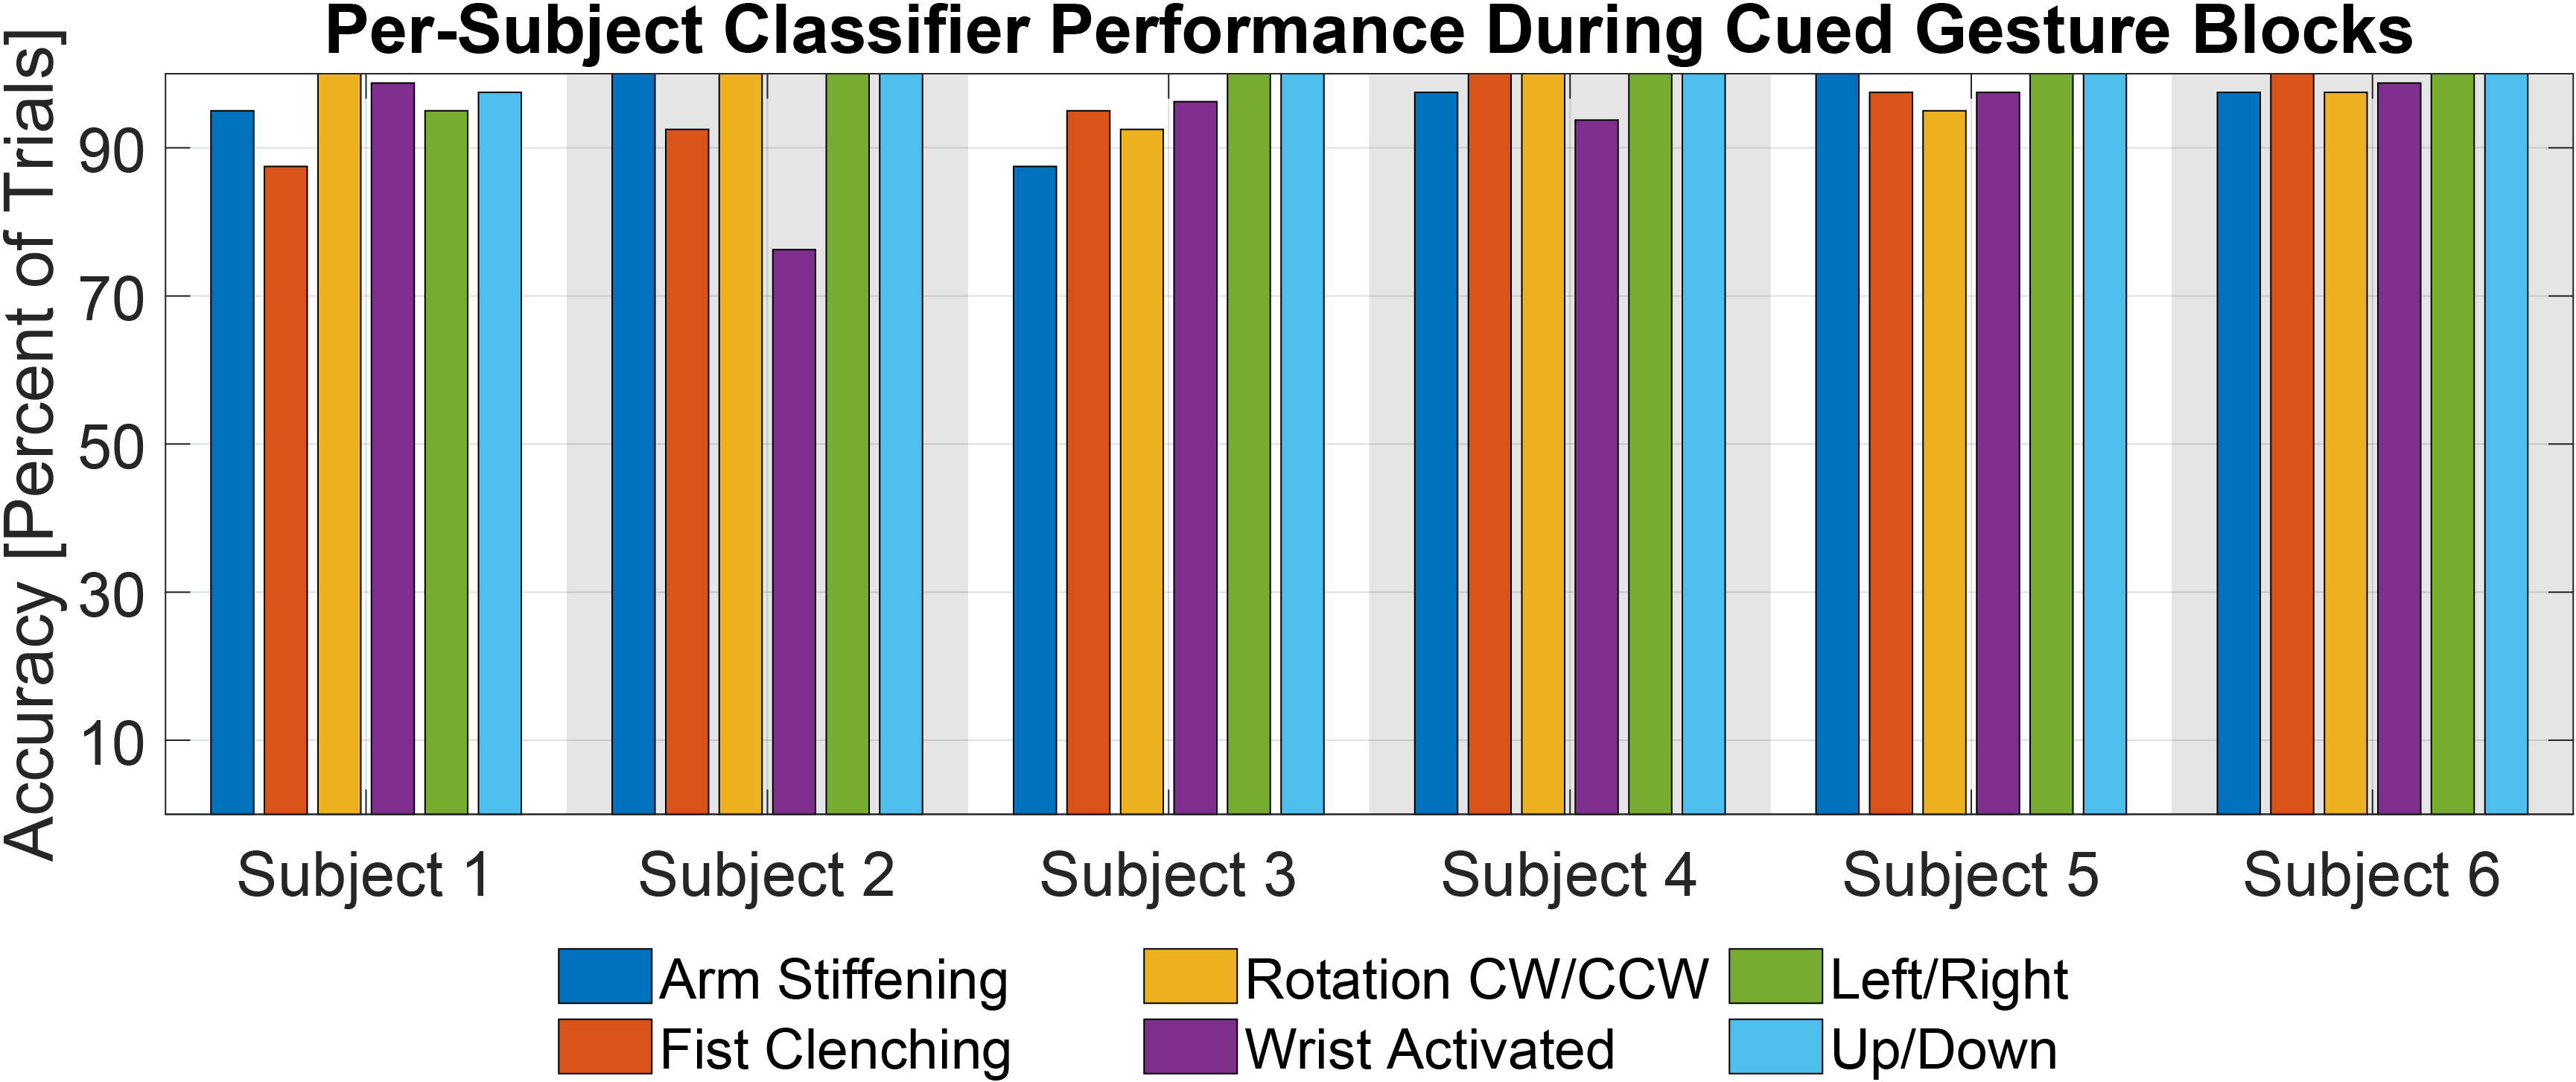 Classification performance for cued gestures